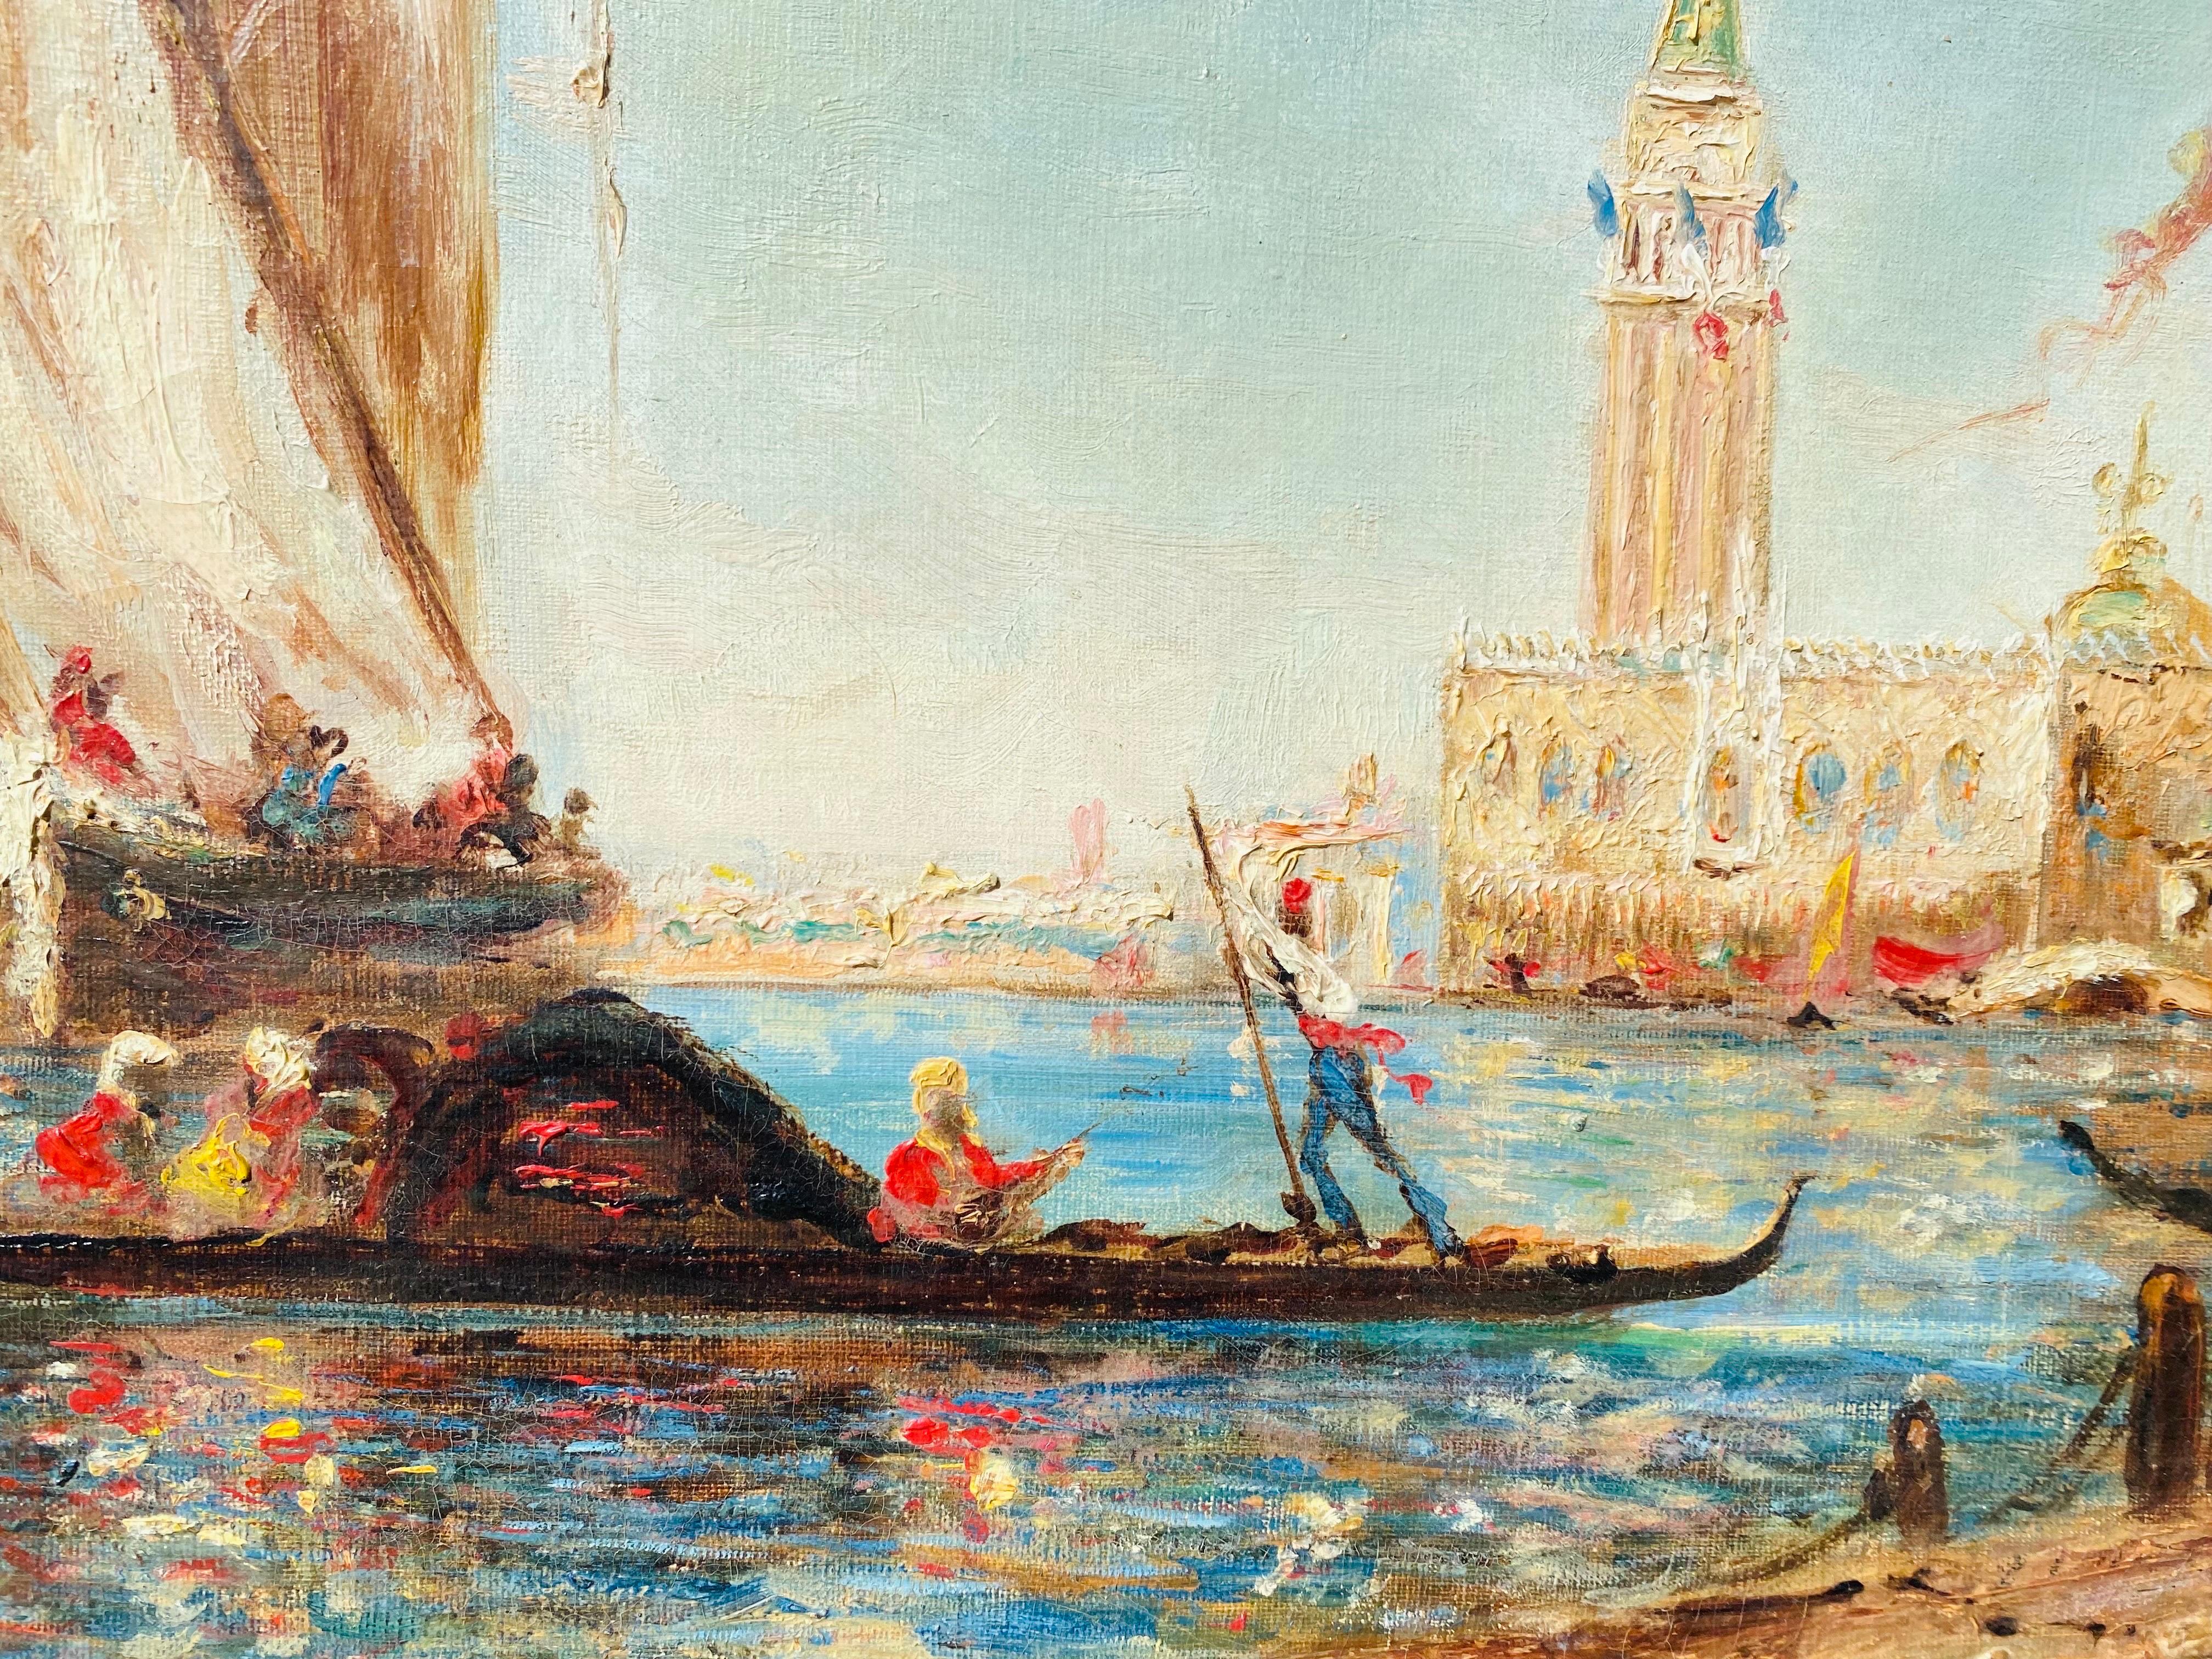 French impressionist painting - View of Venice - Cityscape Boat San Marco - Gray Figurative Painting by Felix Ziem